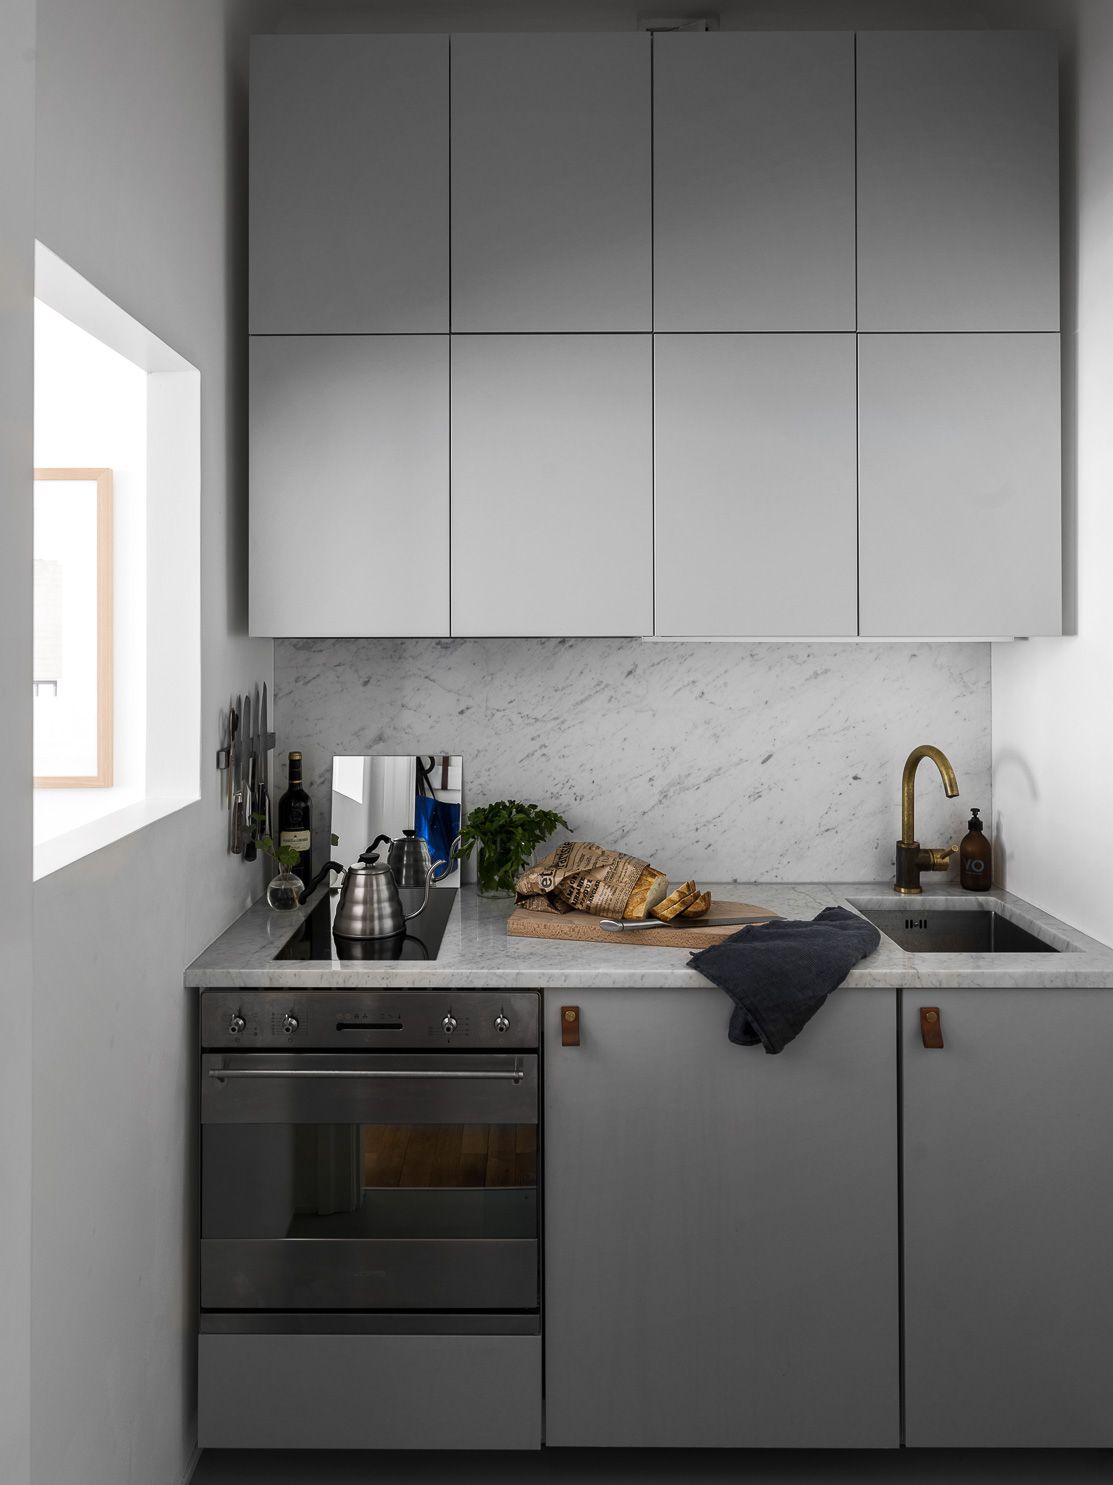 Optimizing Space: Making the Most of a Compact Kitchen